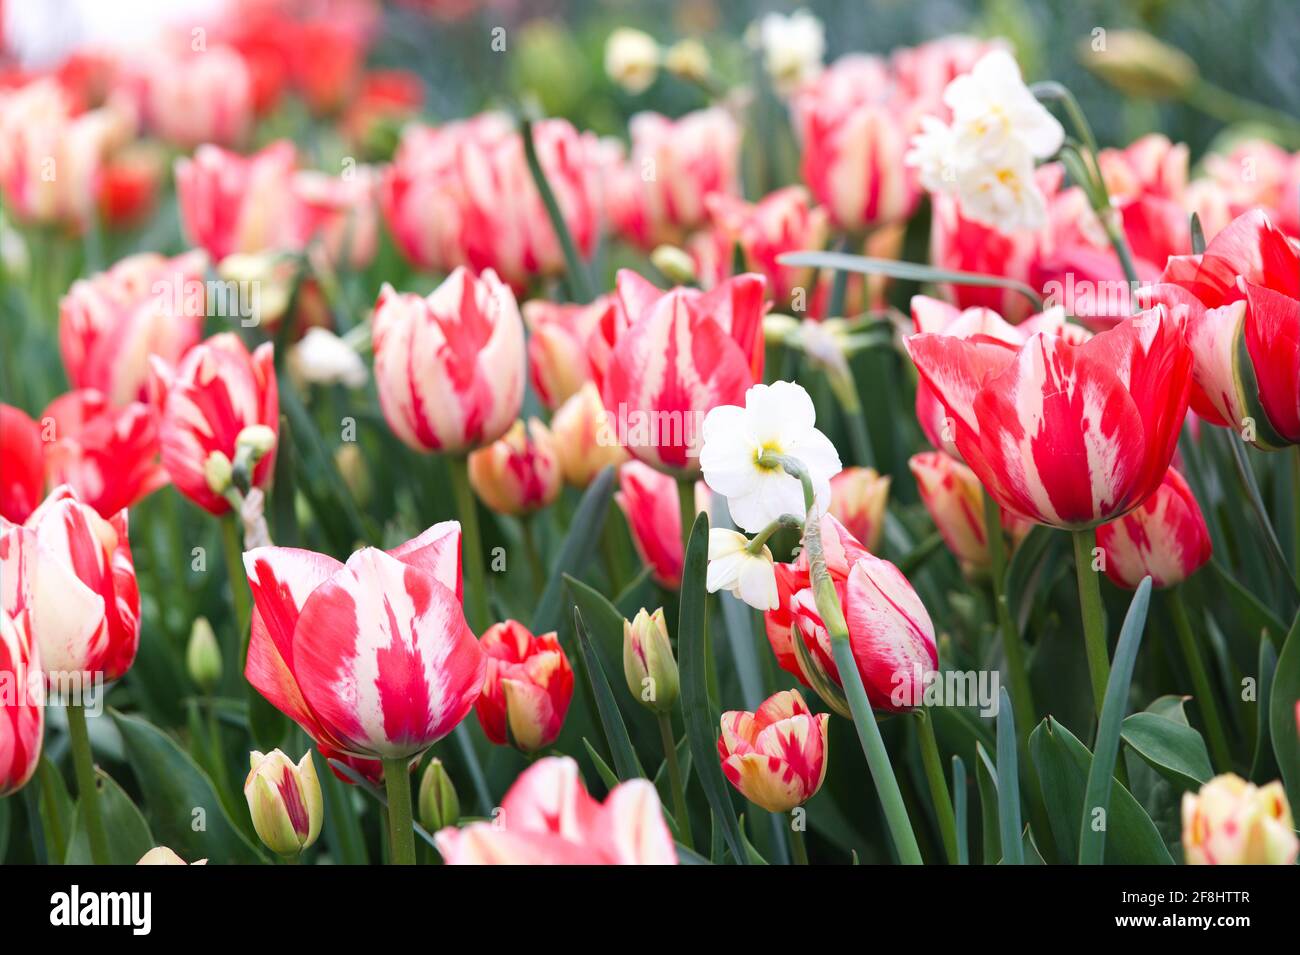 View of a colourful garden border filled with fresh Hybrid Tulips, Spring Break, Essex, Britain, April 2021 Stock Photo